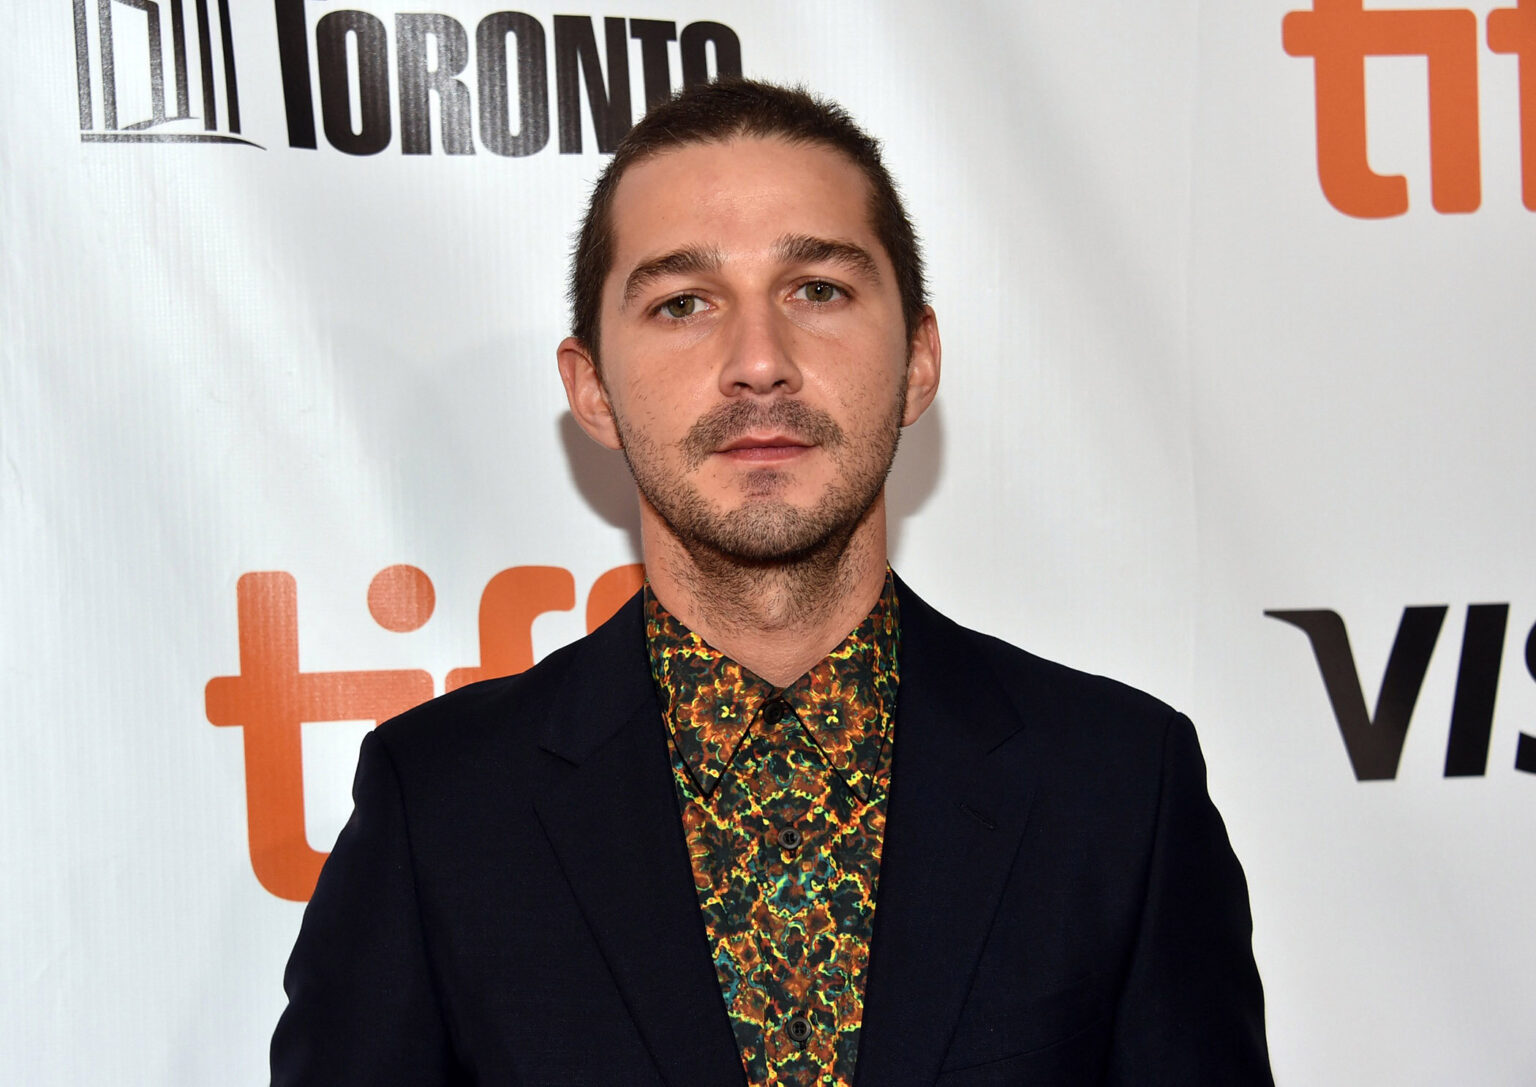 The recent allegations against Shia Labeouf from his ex-girlfriend FKA Twigs has people looking back at all his allegations.